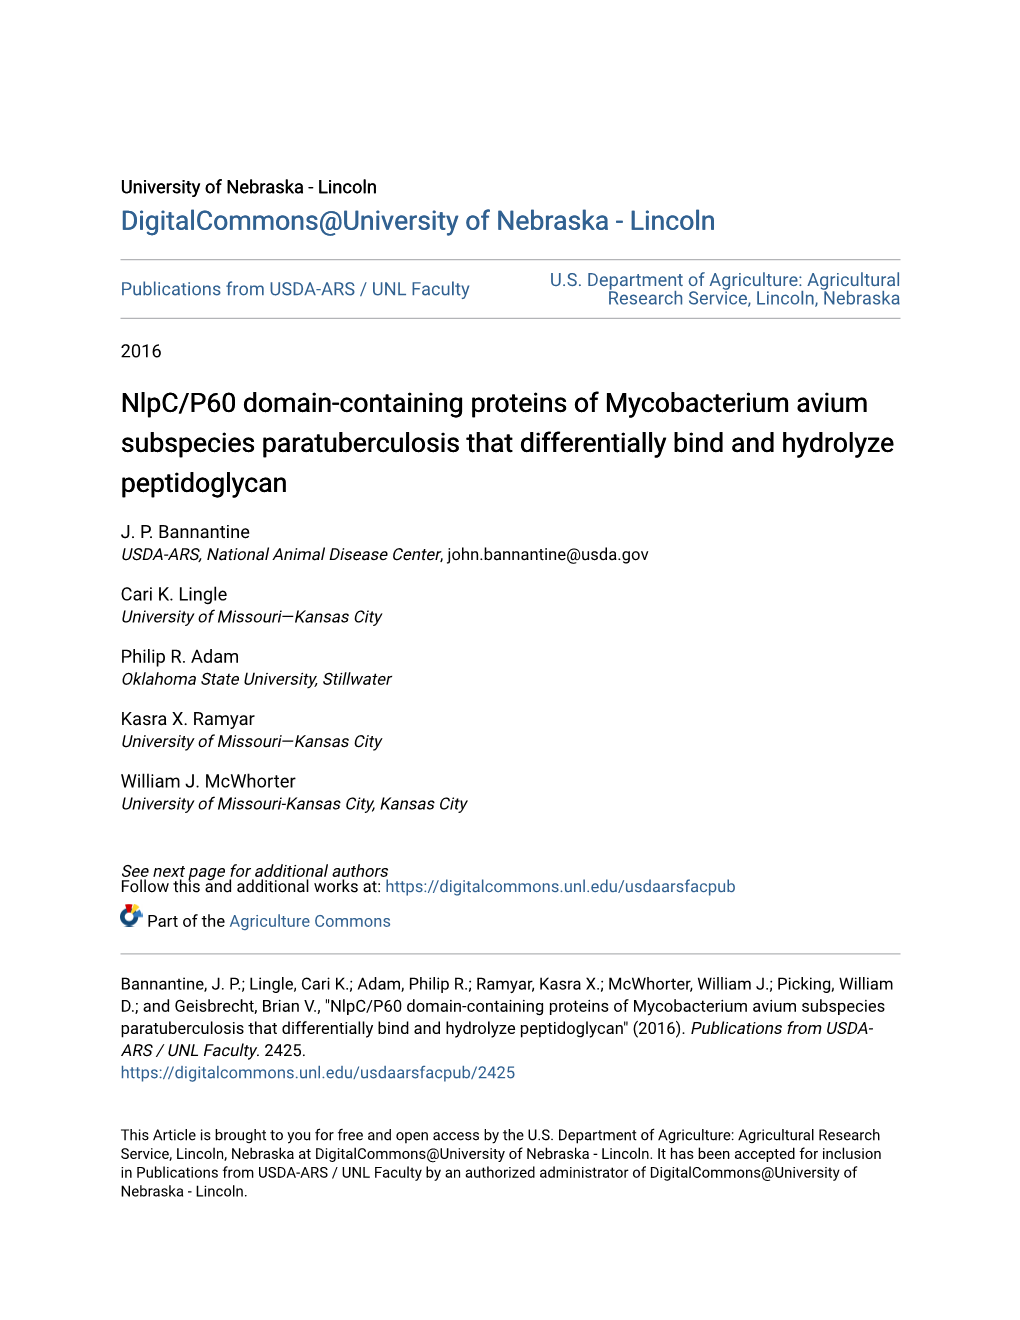 Nlpc/P60 Domain-Containing Proteins of Mycobacterium Avium Subspecies Paratuberculosis That Differentially Bind and Hydrolyze Peptidoglycan